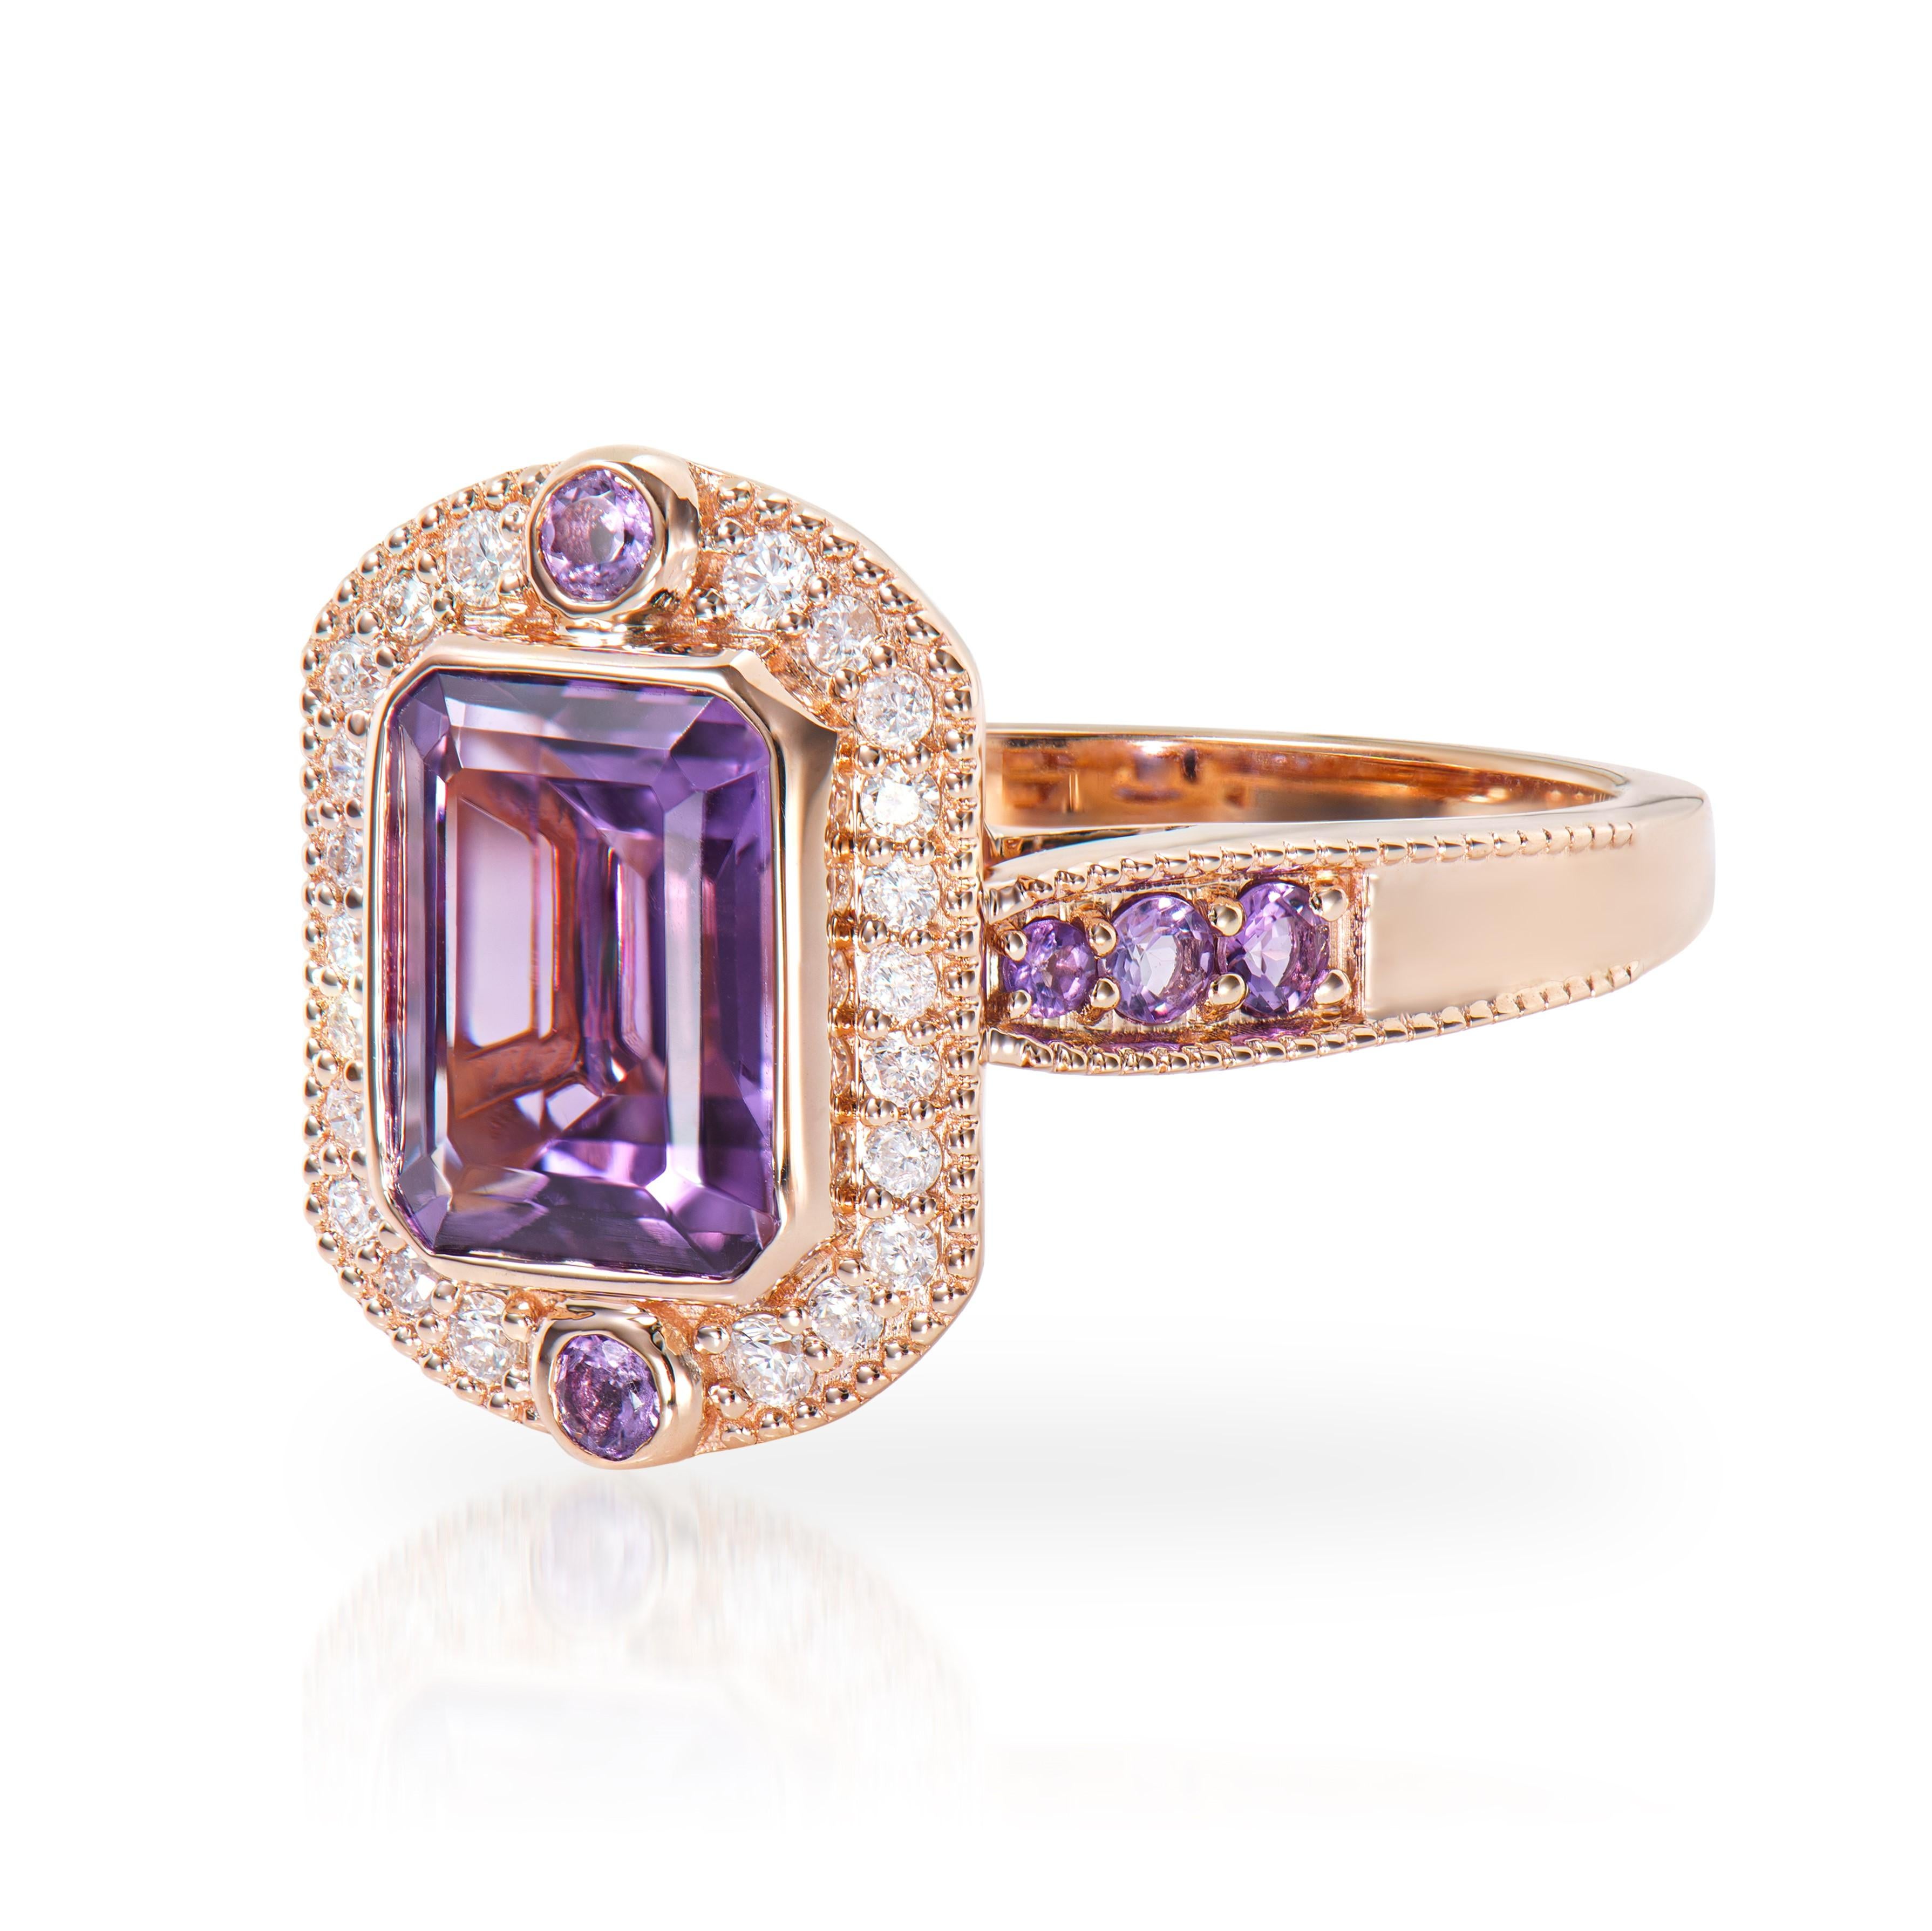 Octagon Cut 2.20 Carat Amethyst Fancy Ring in 14Karat Rose Gold with White Diamond.   For Sale